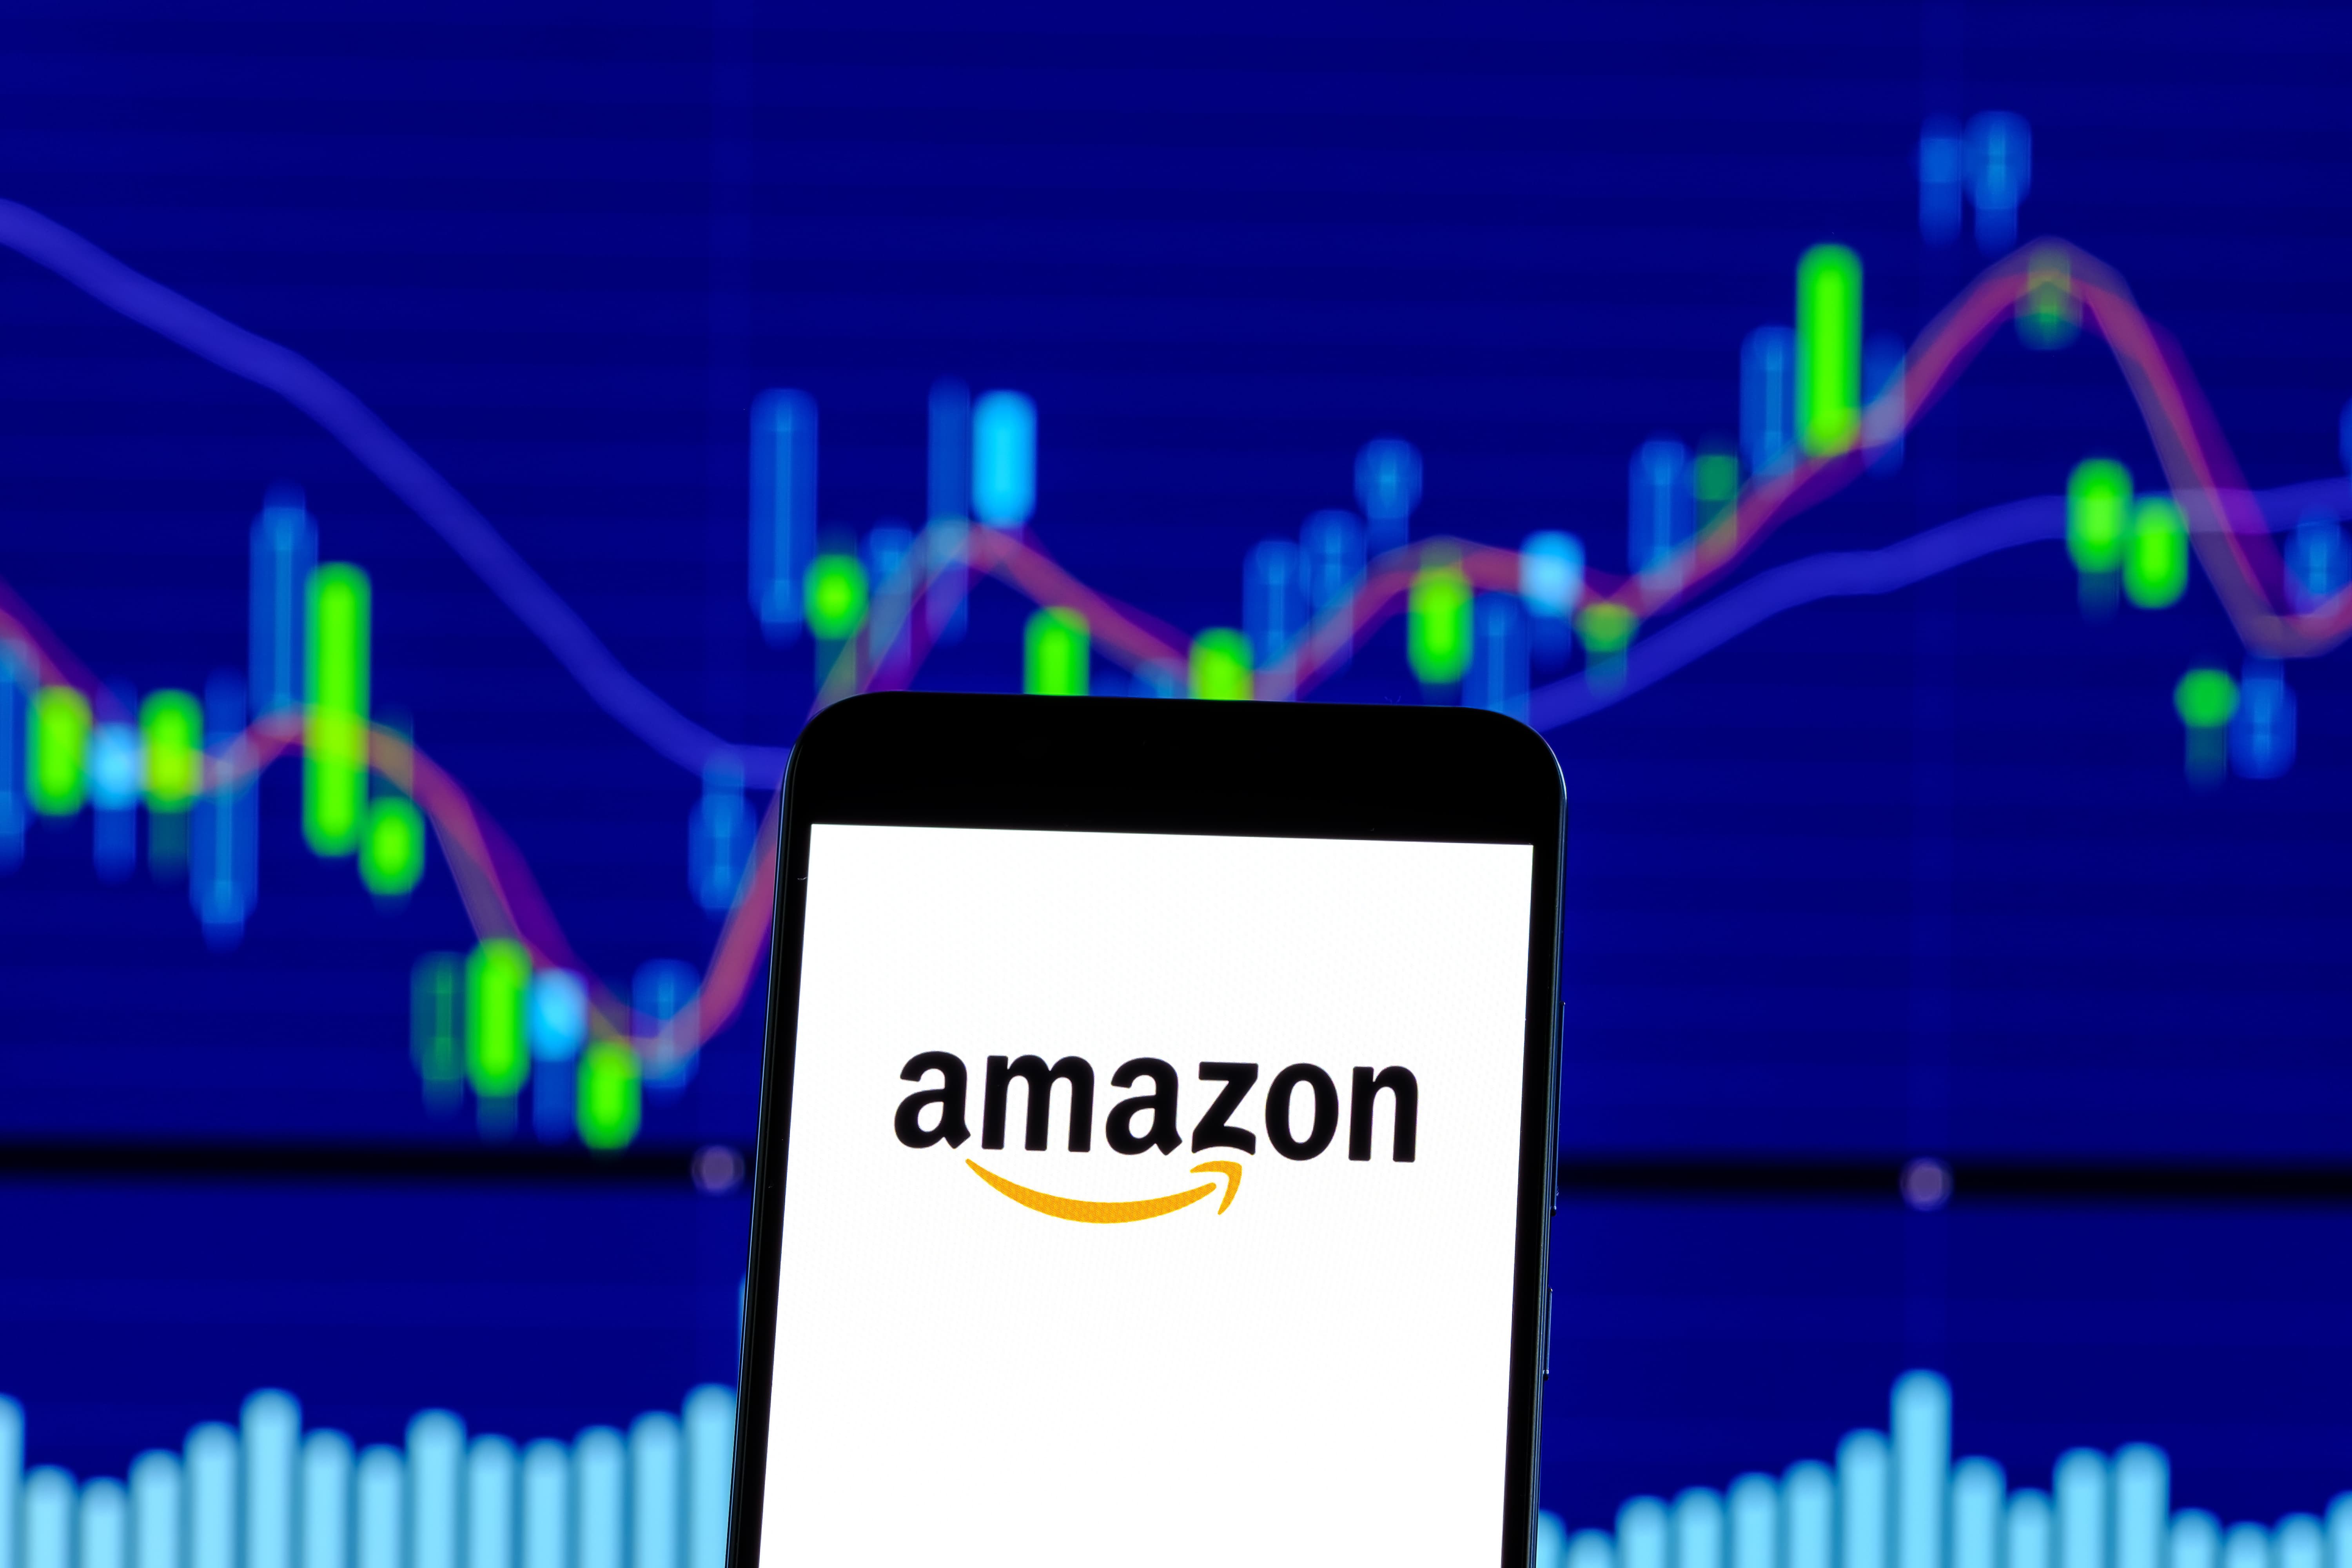 Product Research Tools To Find Best-Selling Items on Amazon